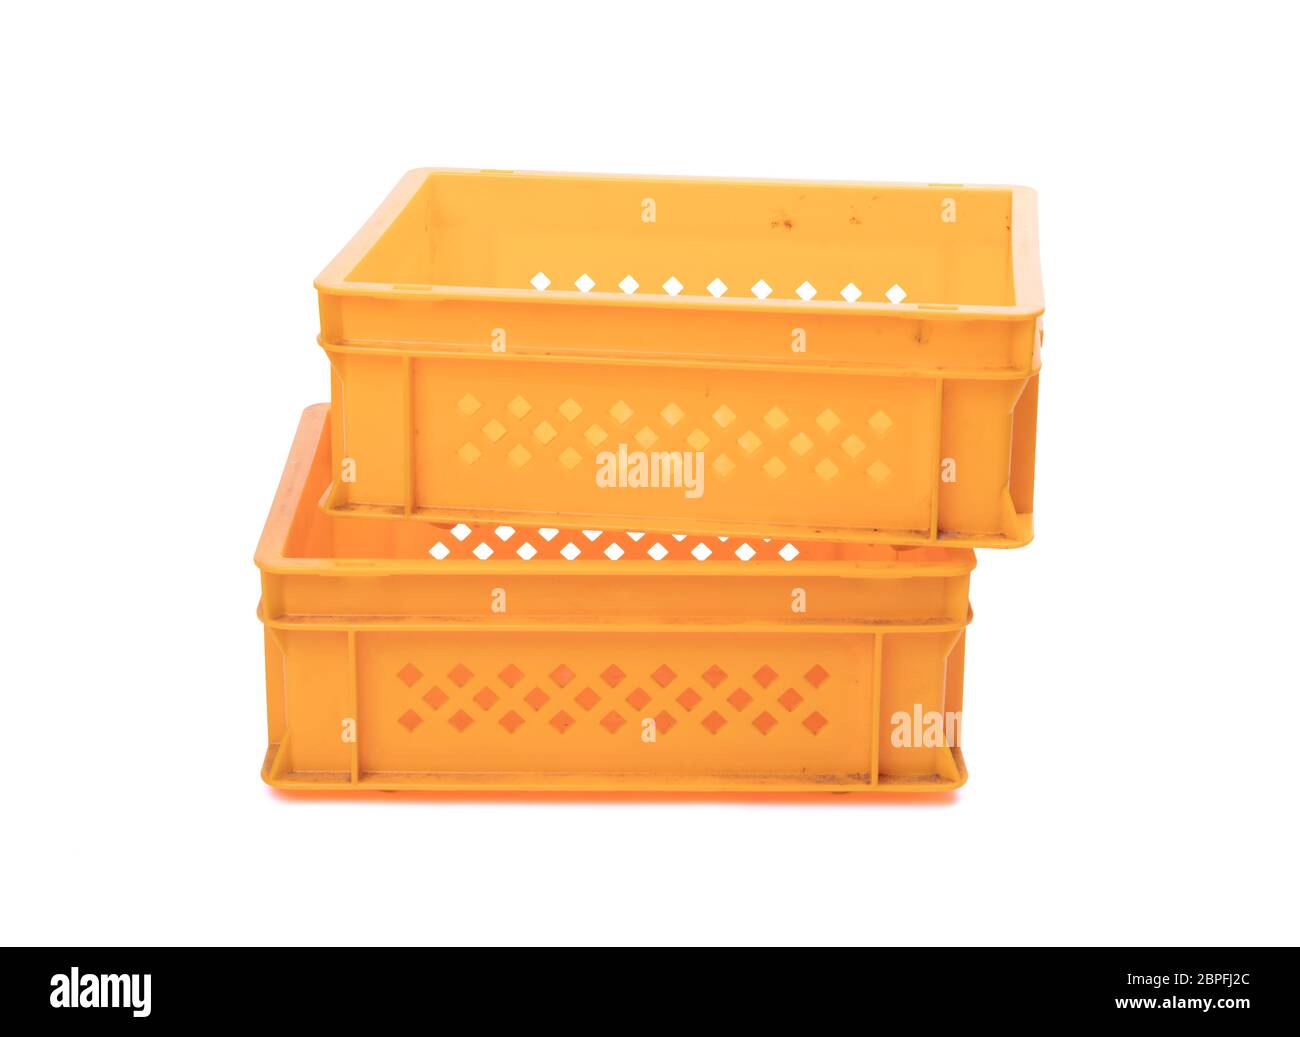 Download Yellow Plastic Crates High Resolution Stock Photography And Images Alamy Yellowimages Mockups